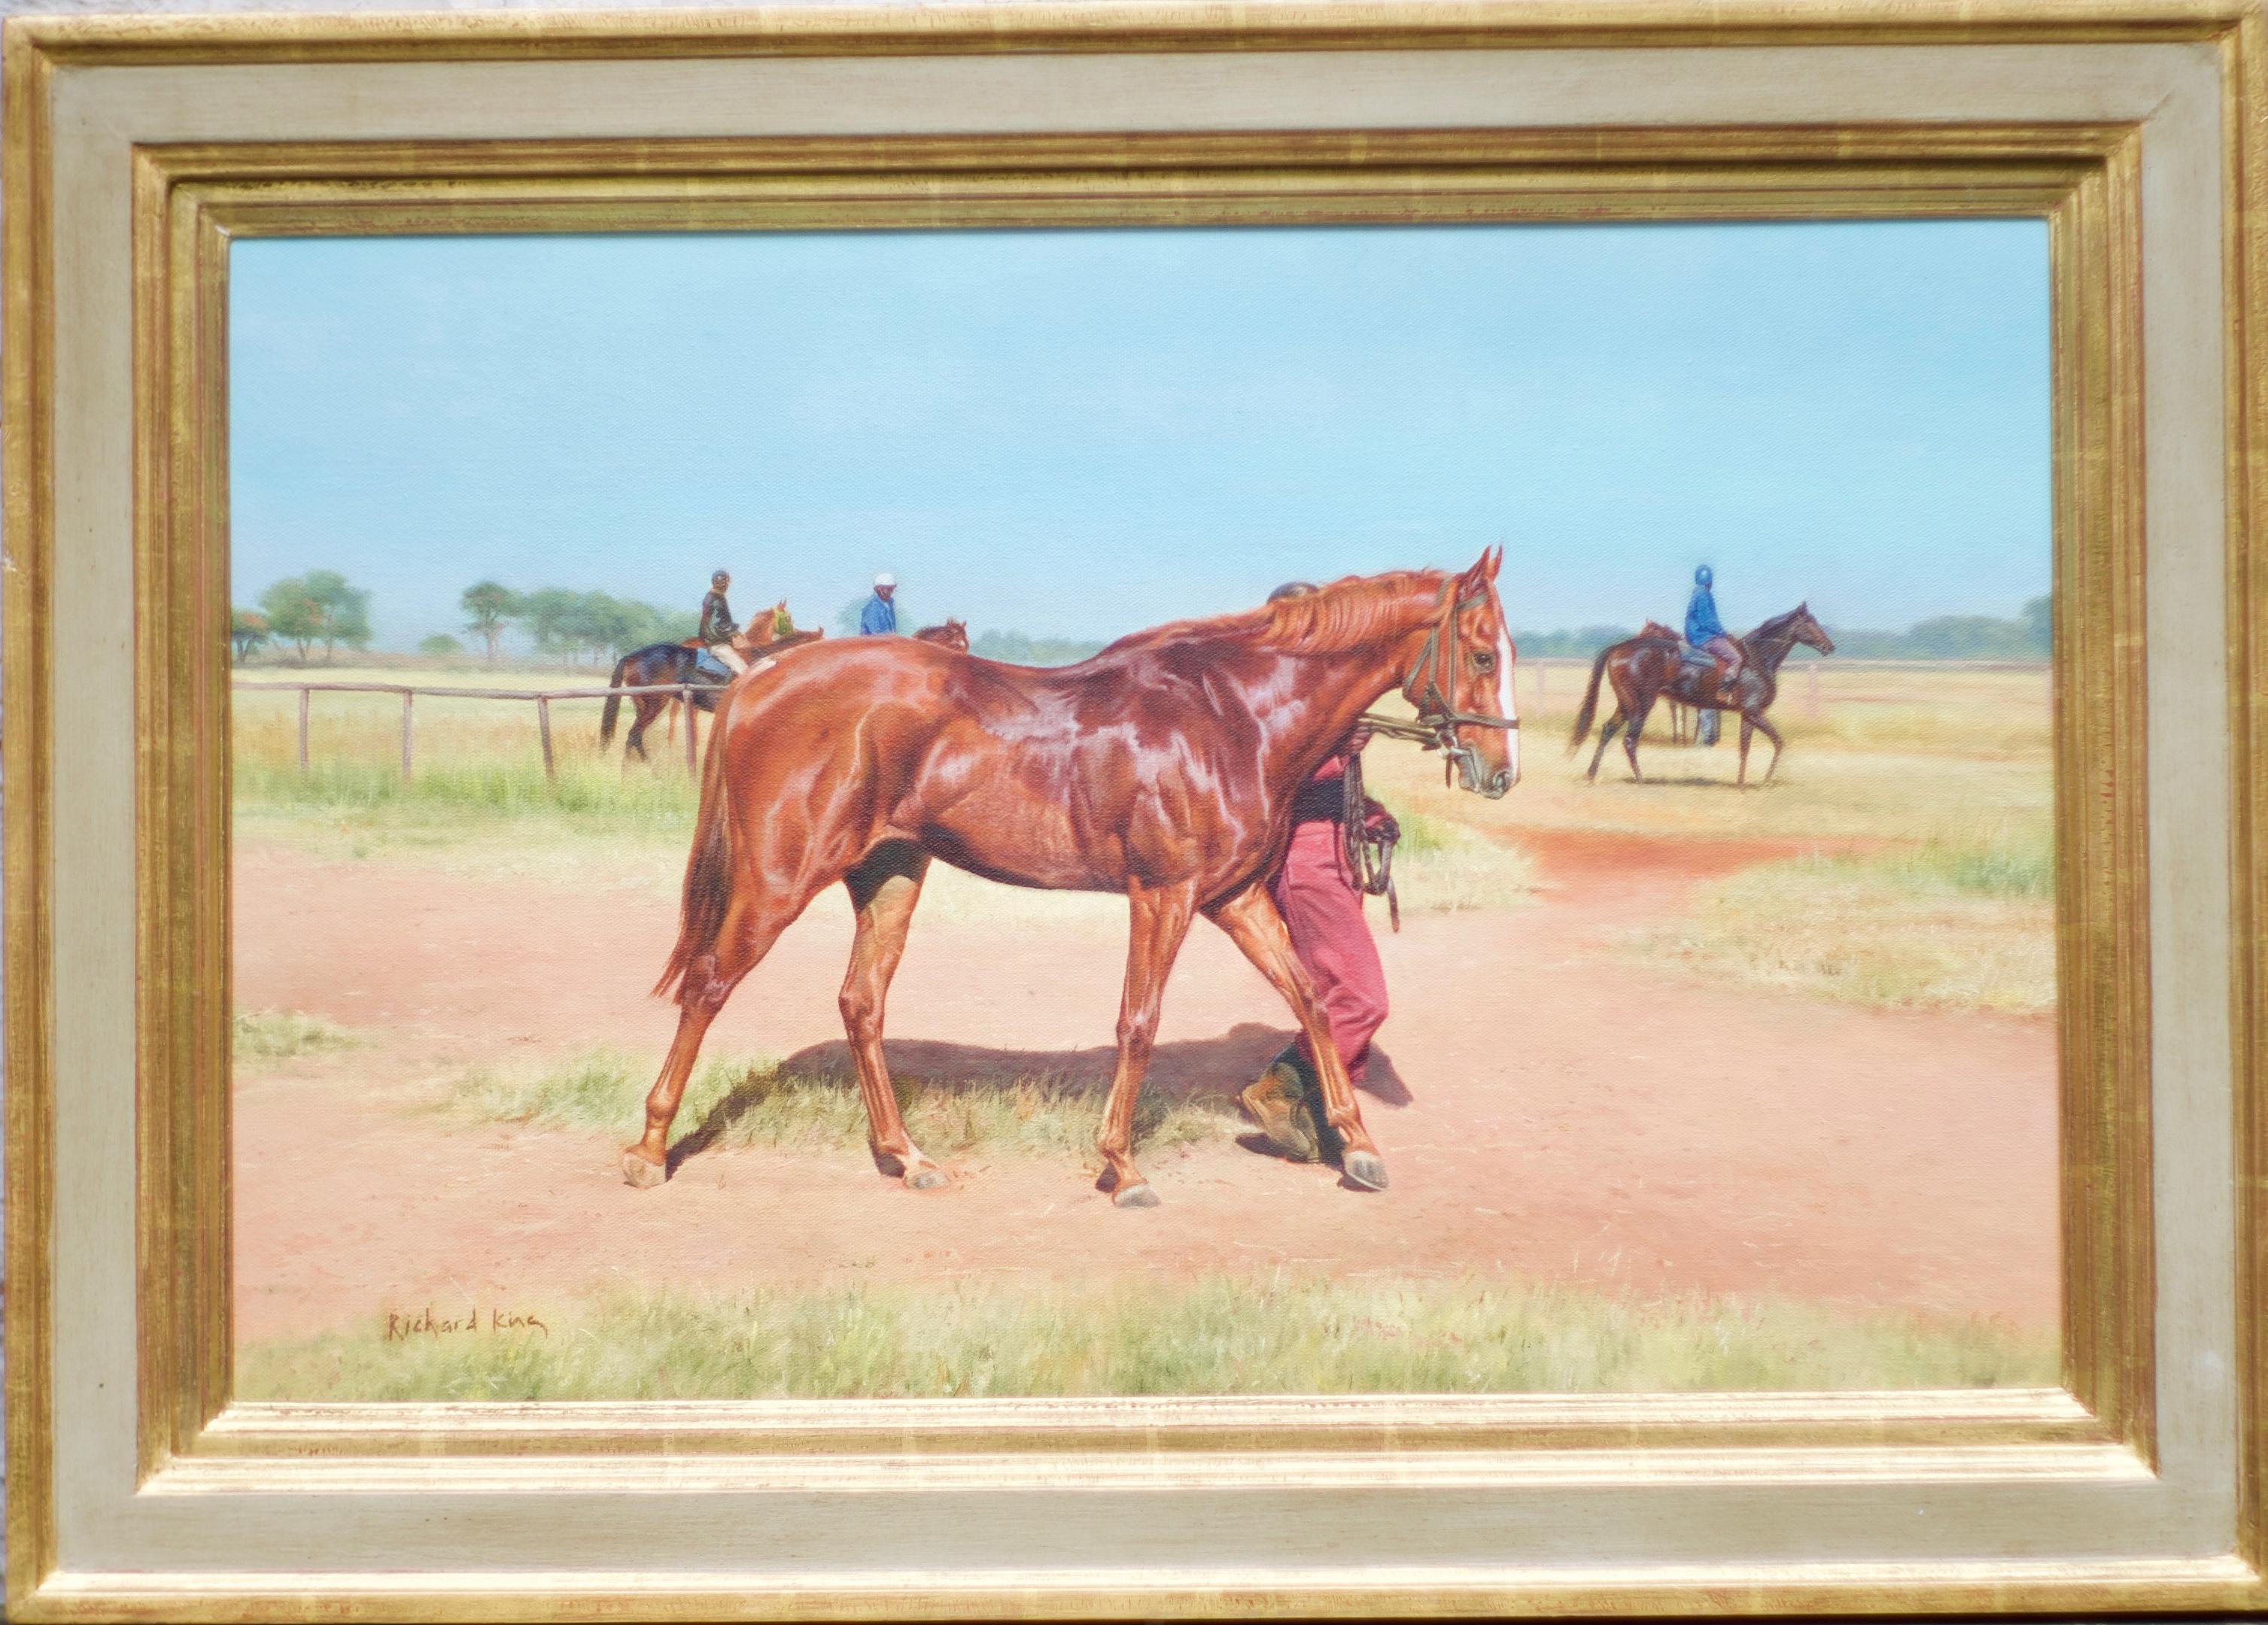 The Chestnut - Equestrian, Racing, Horse, Realist, Wildlife, Contemporary - Painting by Richard King 